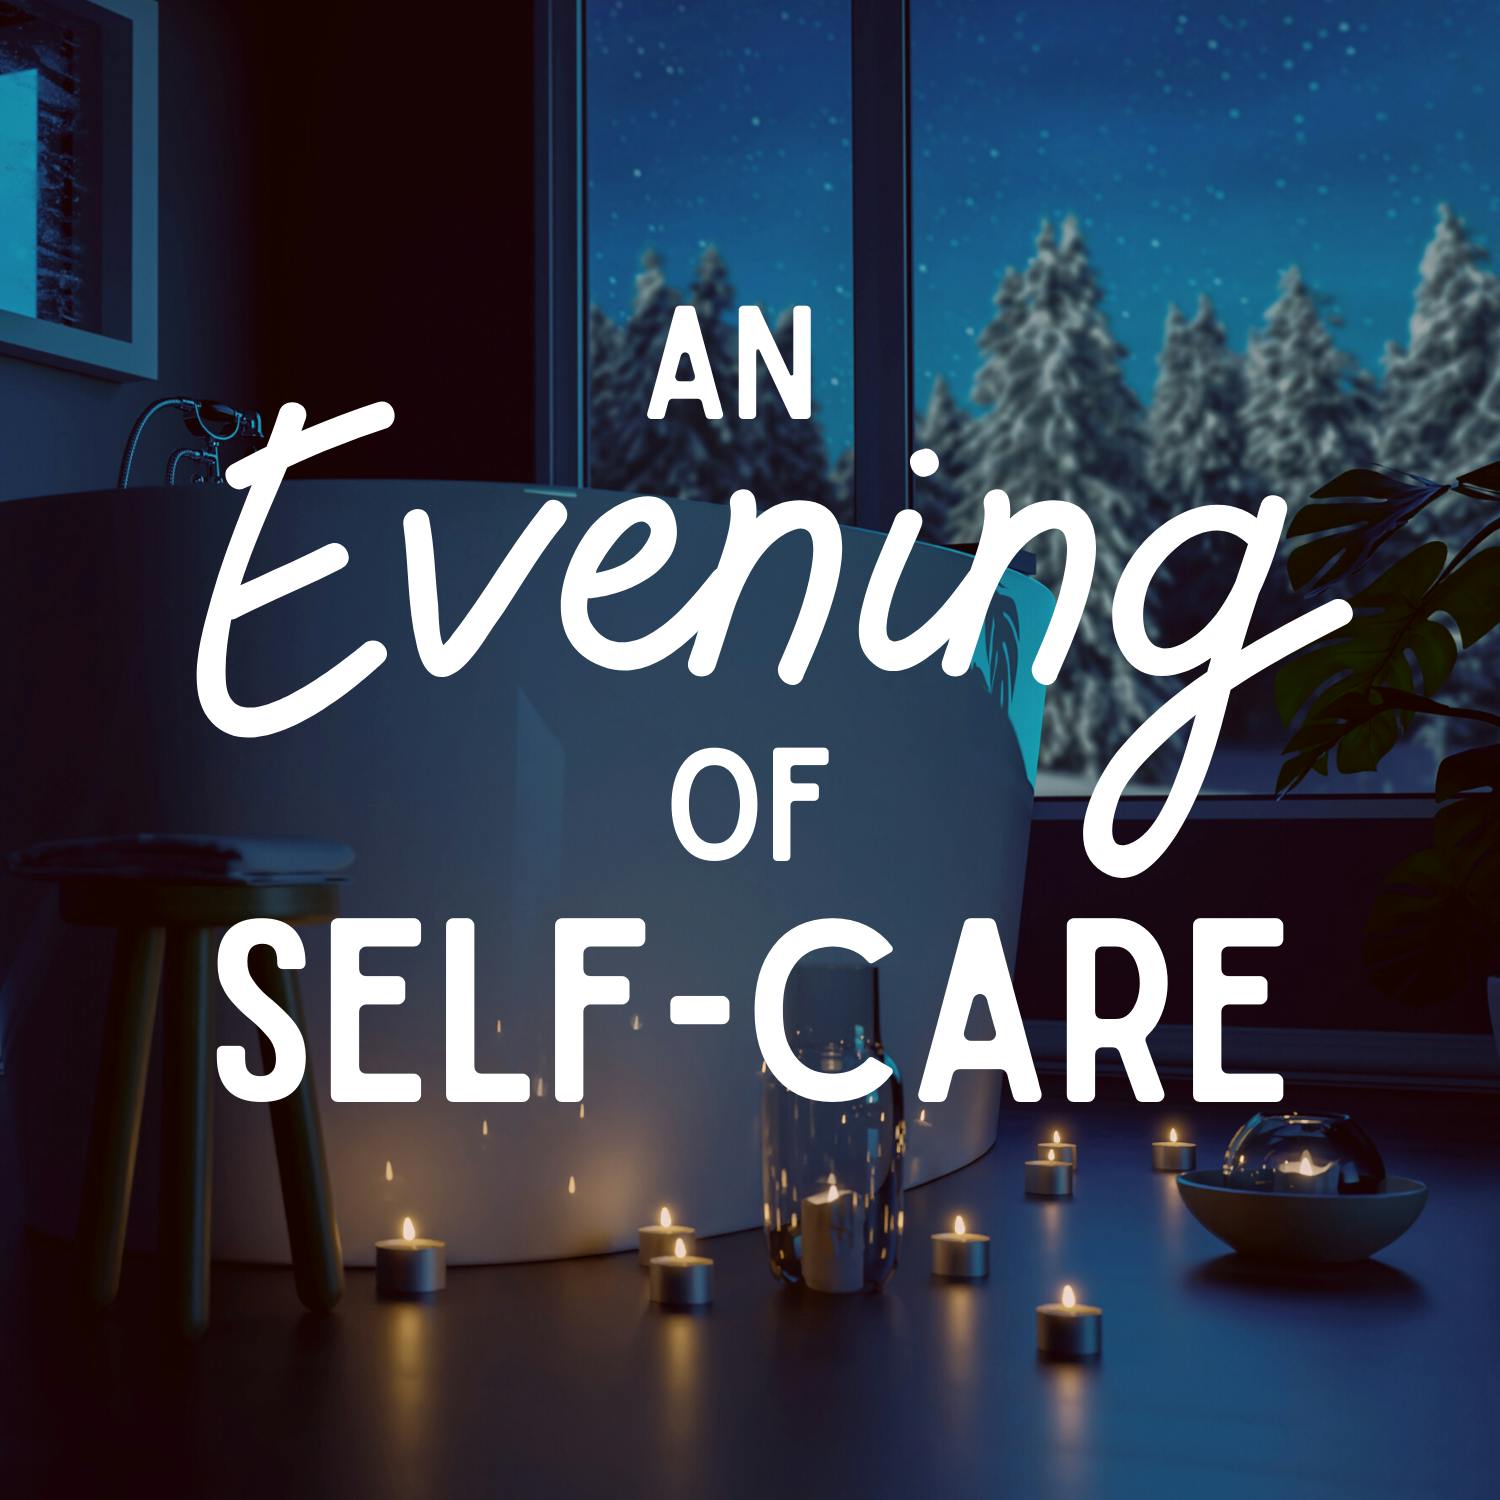 An Evening of Self-Care